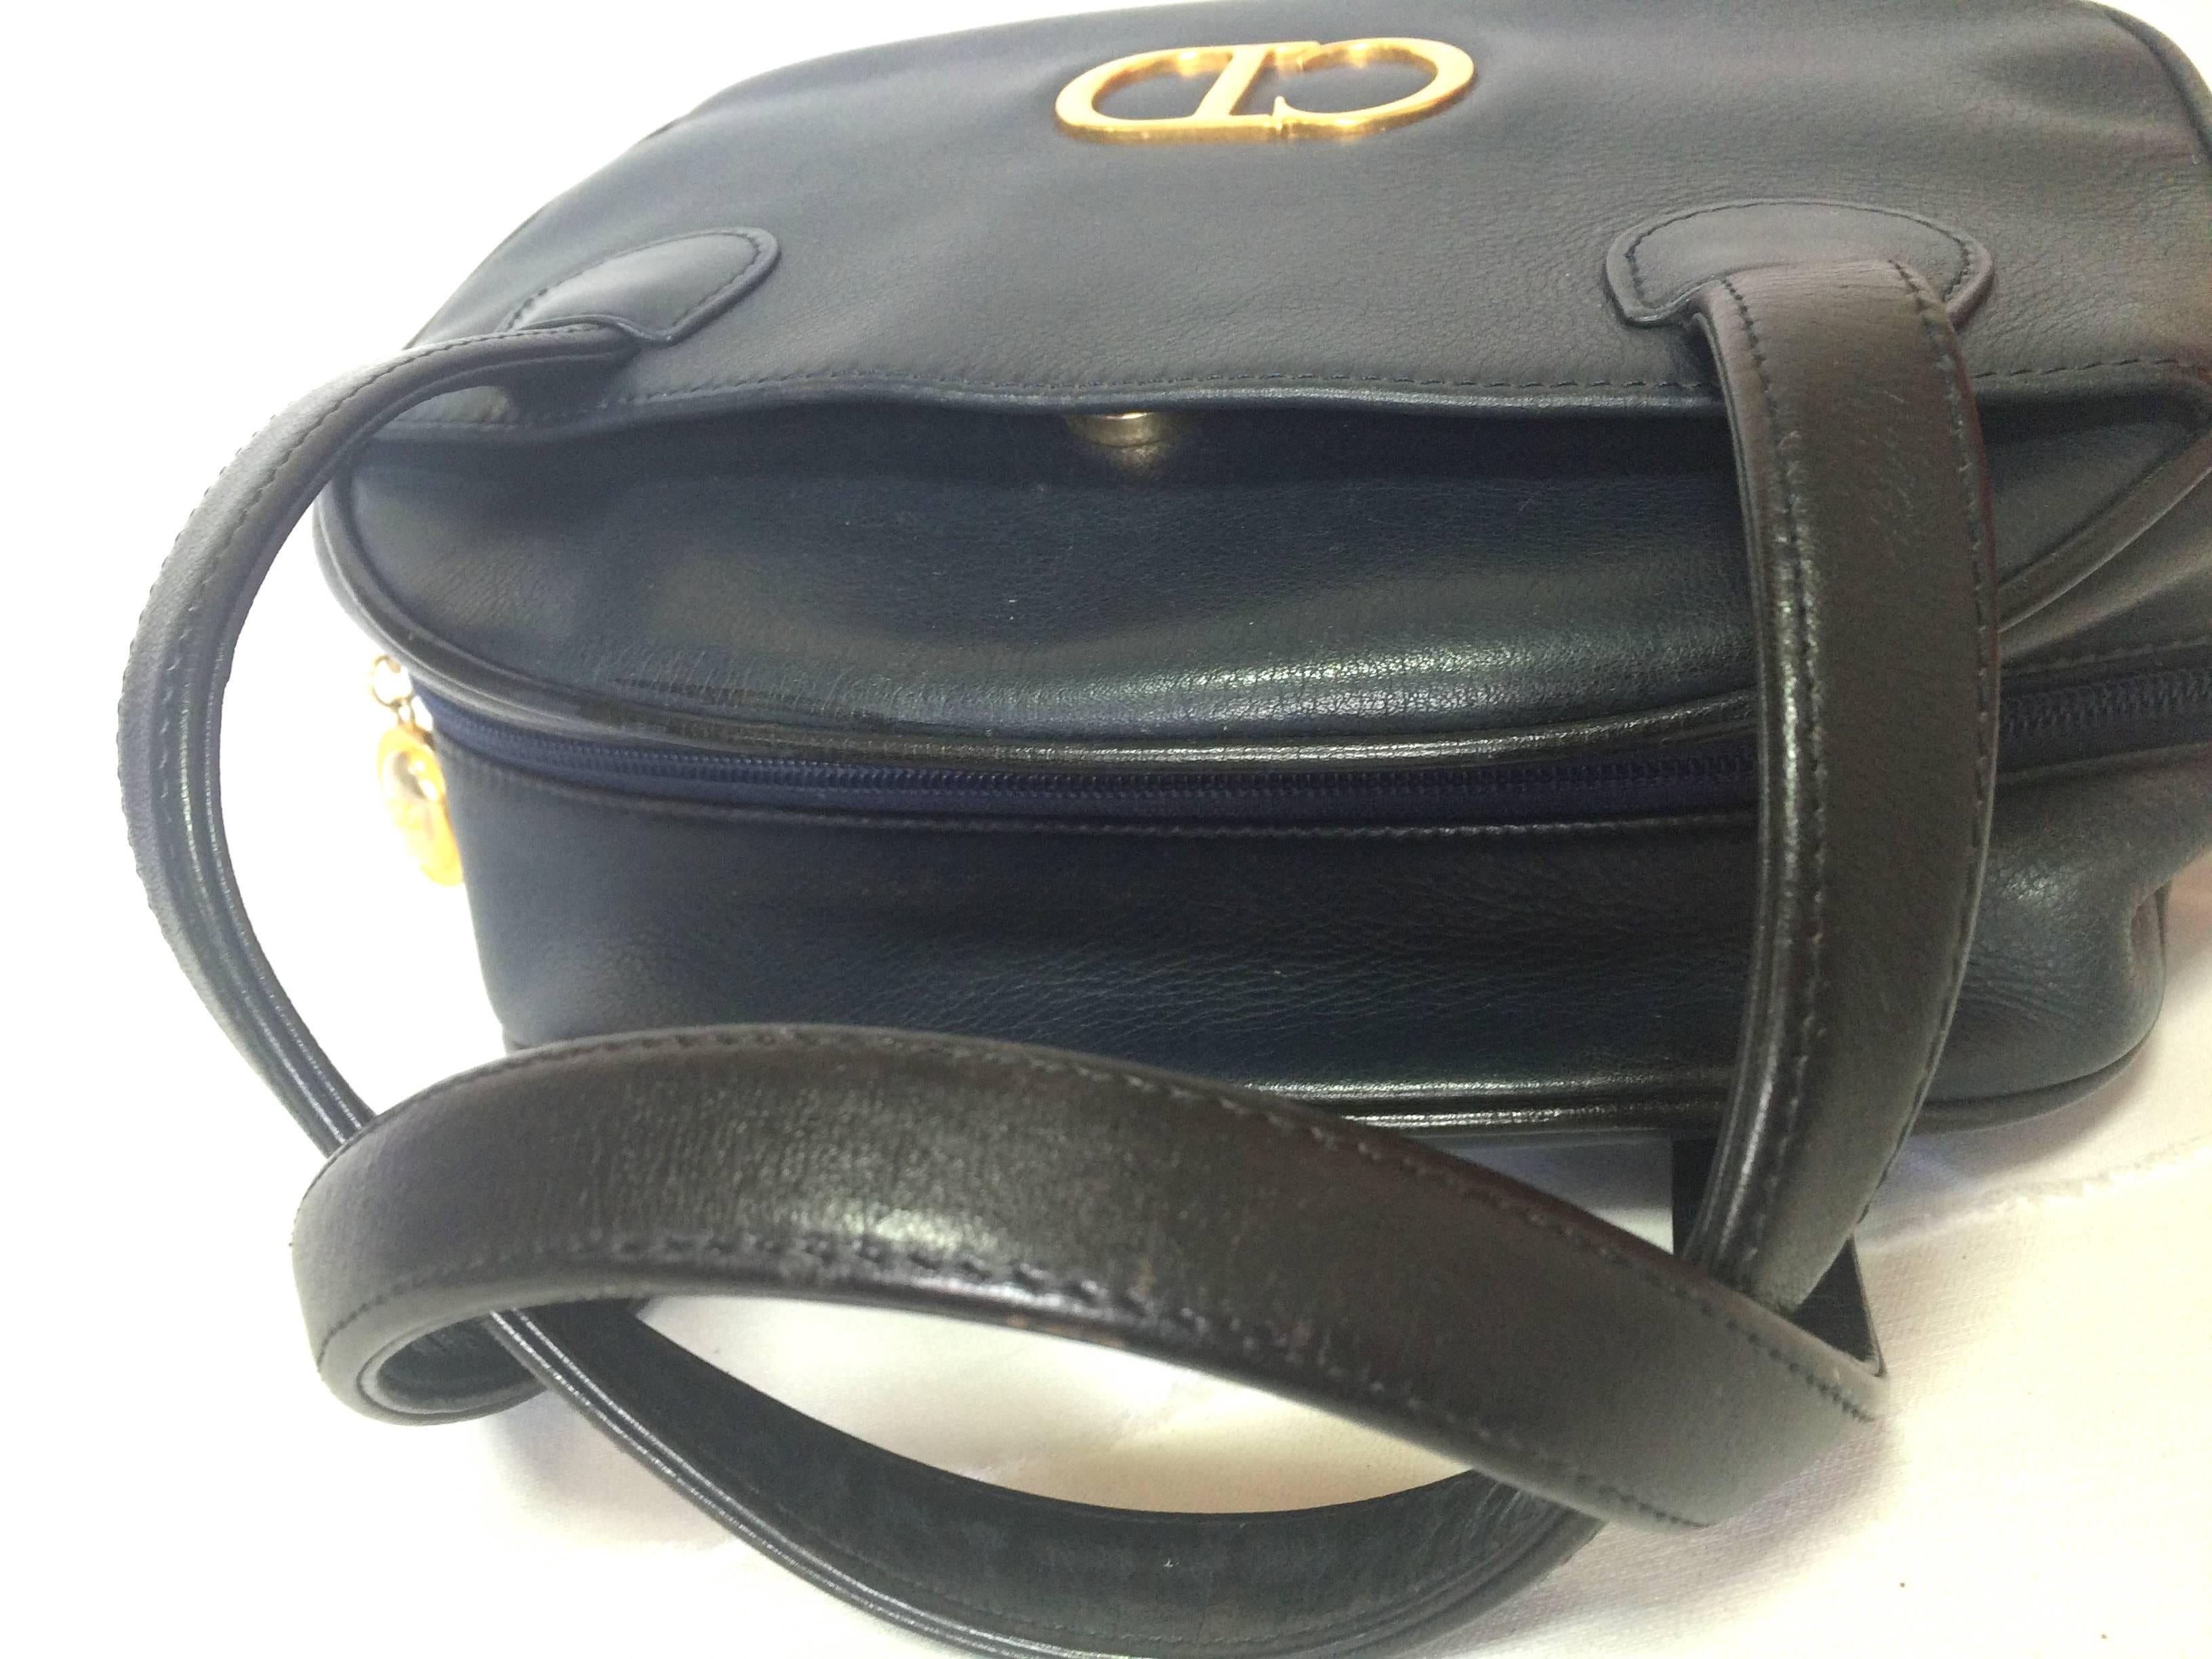 Vintage Christian Dior navy bolide style handbag with golden large CD logo motif In Good Condition In Kashiwa, Chiba